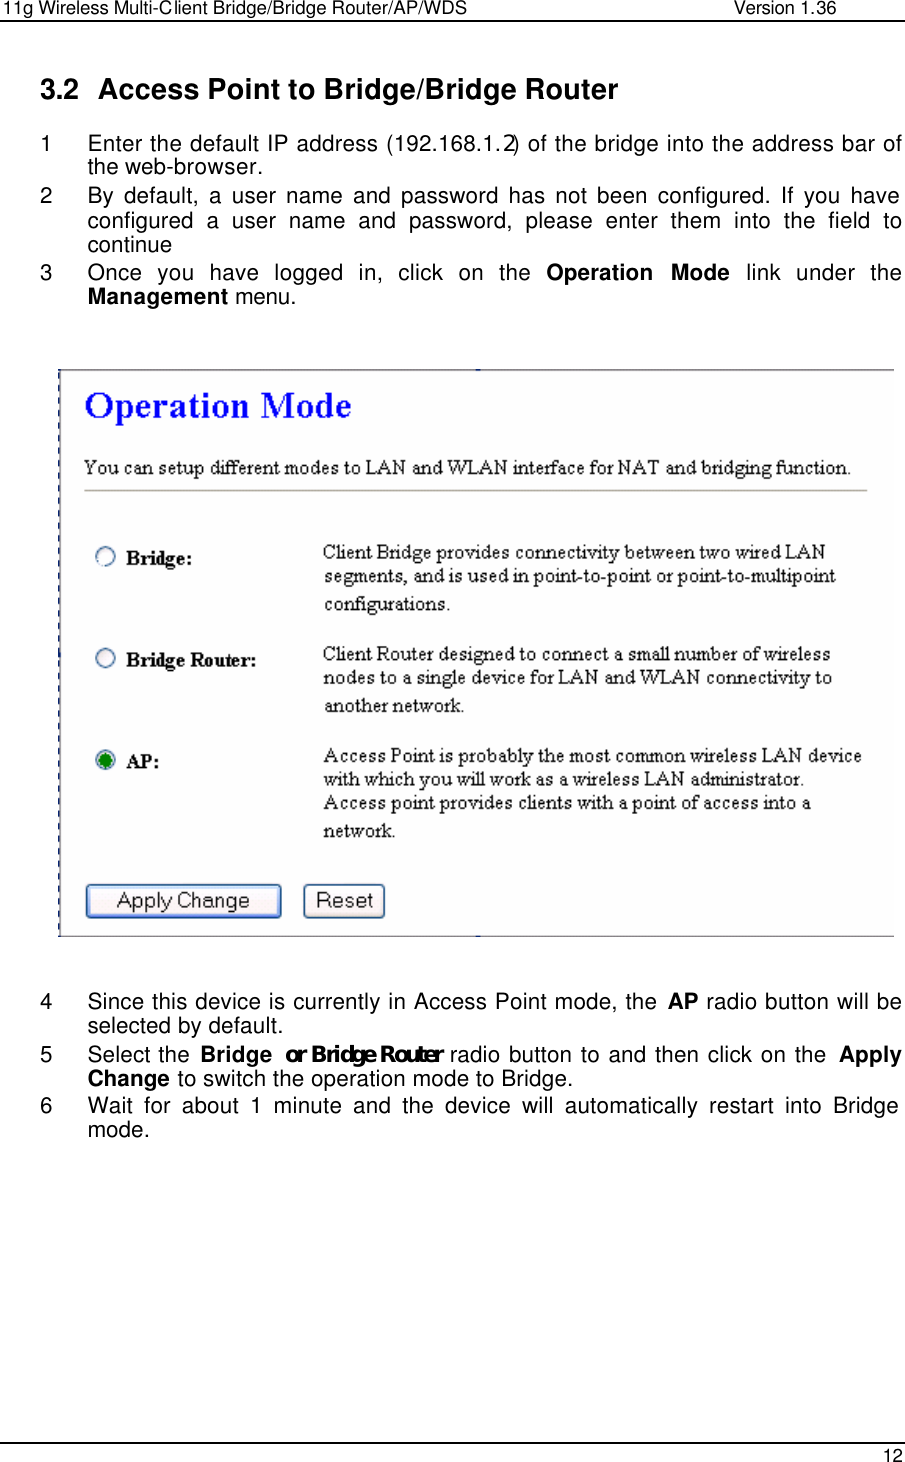 11g Wireless Multi-Client Bridge/Bridge Router/AP/WDS                                                   Version 1.36    12  3.2 Access Point to Bridge/Bridge Router 1 Enter the default IP address (192.168.1.2) of the bridge into the address bar of the web-browser. 2 By default, a user name and password has not been configured. If you have configured a user name and password, please enter them into the field to continue 3 Once you have logged in, click on the Operation Mode link under the Management menu.                            4 Since this device is currently in Access Point mode, the AP radio button will be selected by default.  5 Select the Bridge or Bridge Router radio button to and then click on the  Apply Change to switch the operation mode to Bridge.  6 Wait for about 1 minute and the device will automatically restart into Bridge mode.   